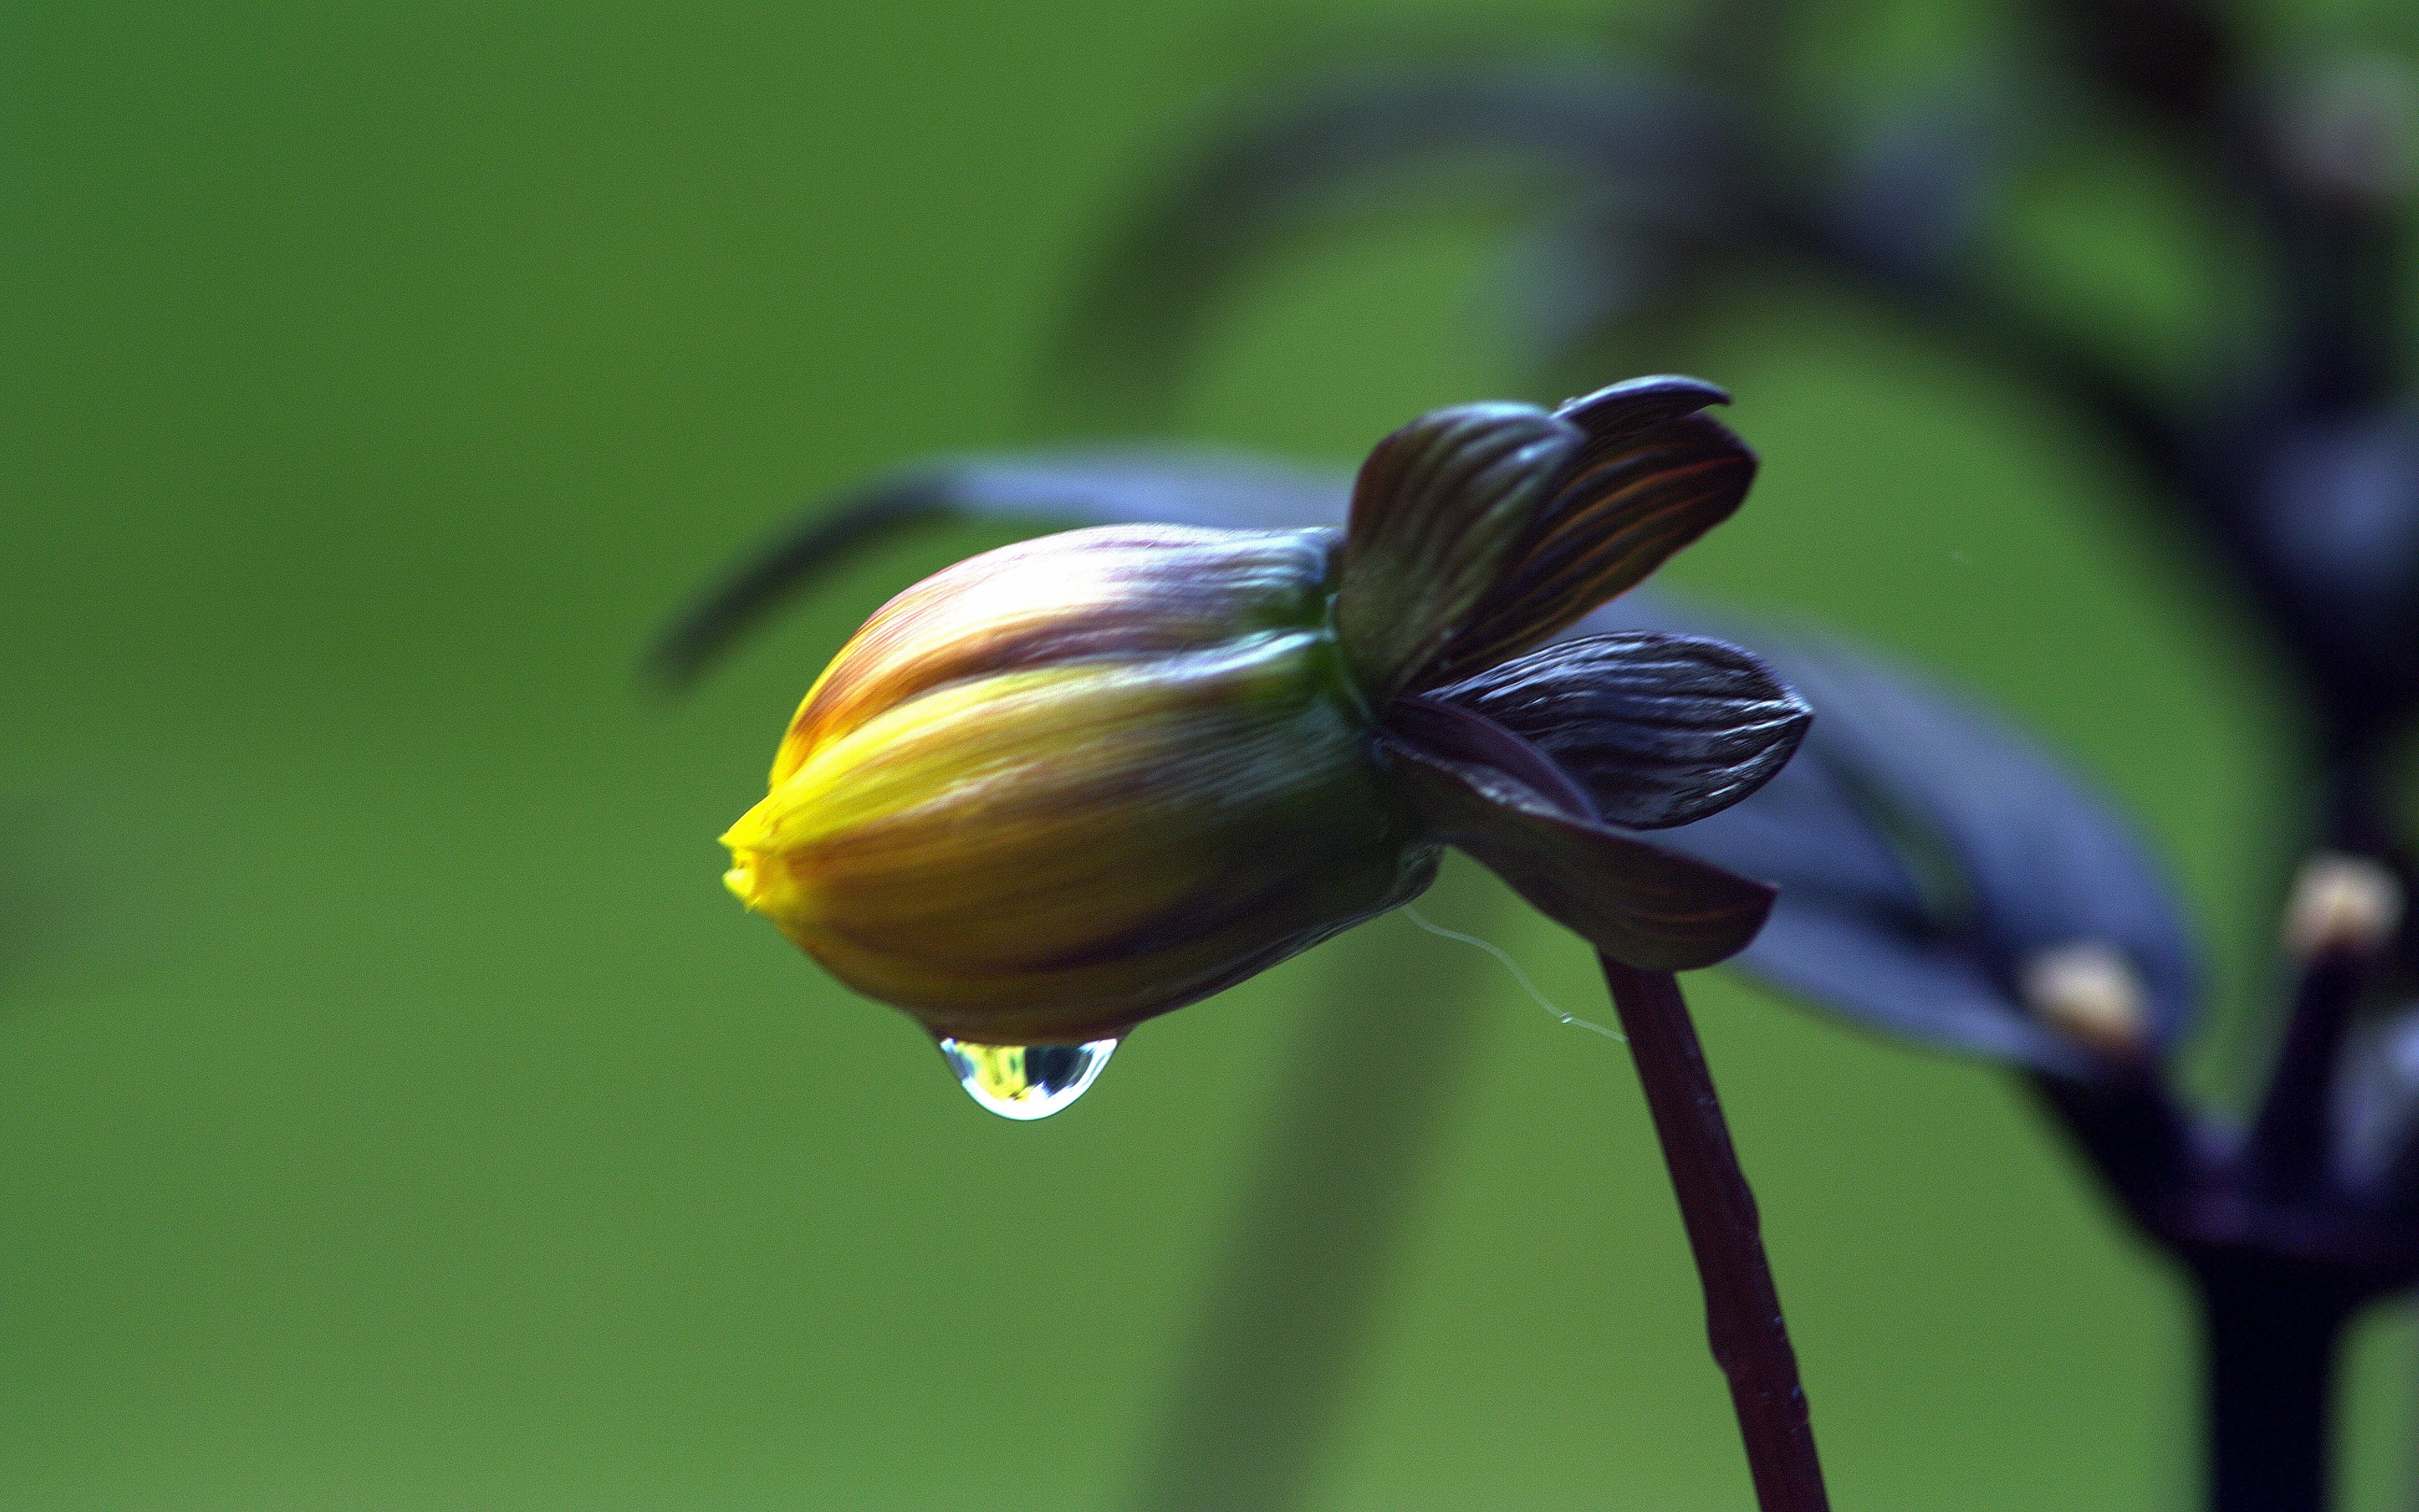 Flower, Raindrop, Yellow, Stem, Leaves, focus on foreground, close-up